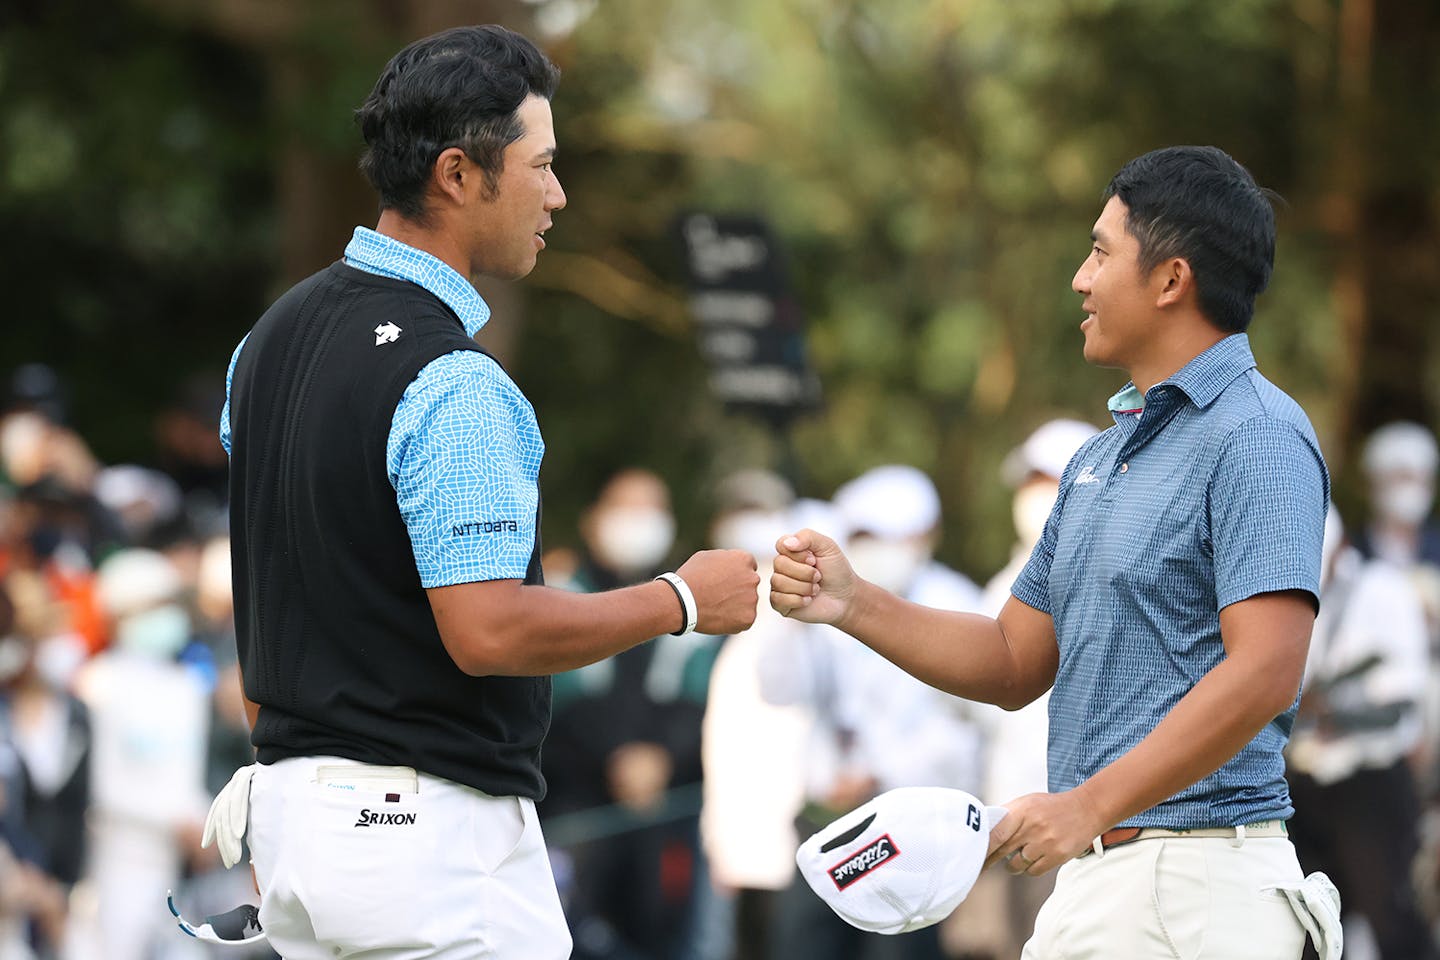 C.T. Pan (R) of Chinese Taipei and Hideki Matsuyama (L) of Japan fist bump after holing out on the 18th green during the first round of the ZOZO Championship at Accordia Golf Narashino Country Club on October 21, 2021 in Inzai, Chiba, Japan. (Photo by Atsushi Tomura/Getty Images)